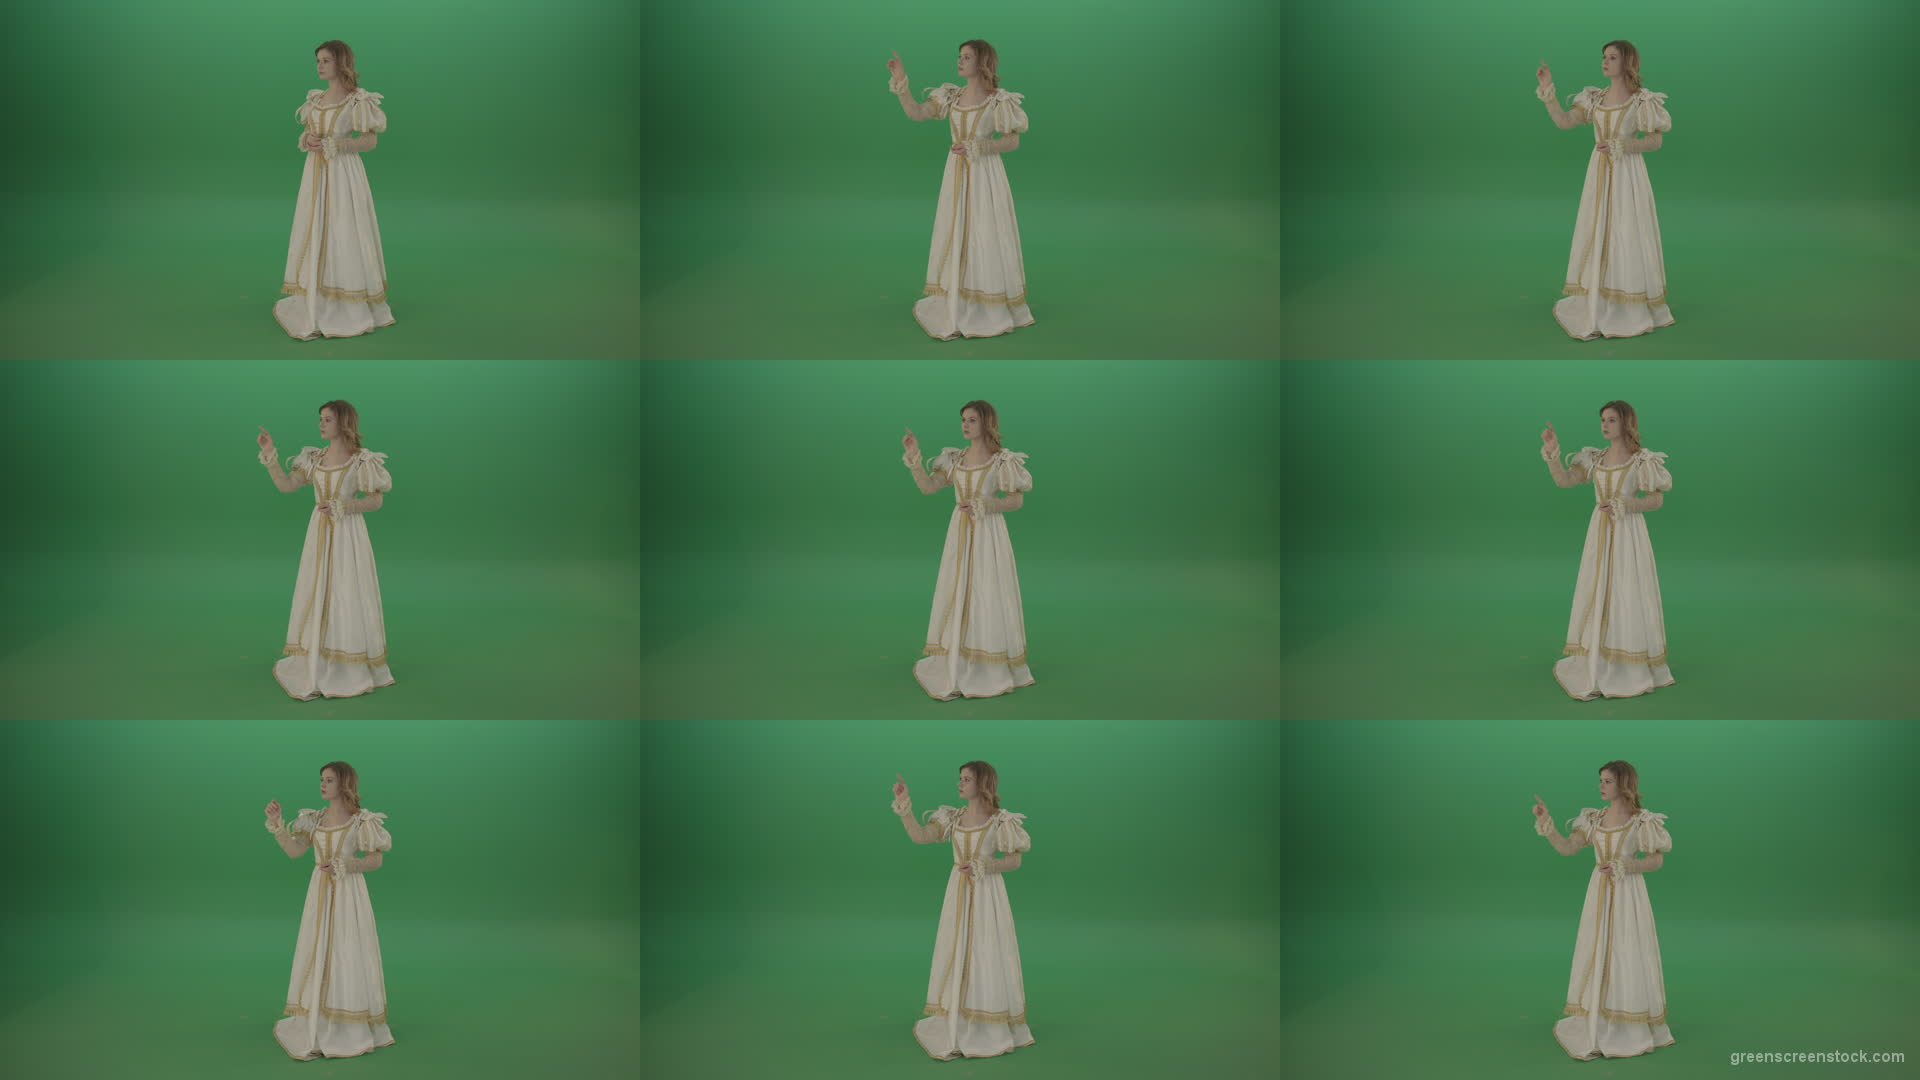 Flips-the-touchscreen-princess-in-a-white-dress-isolated-on-green-screen Green Screen Stock